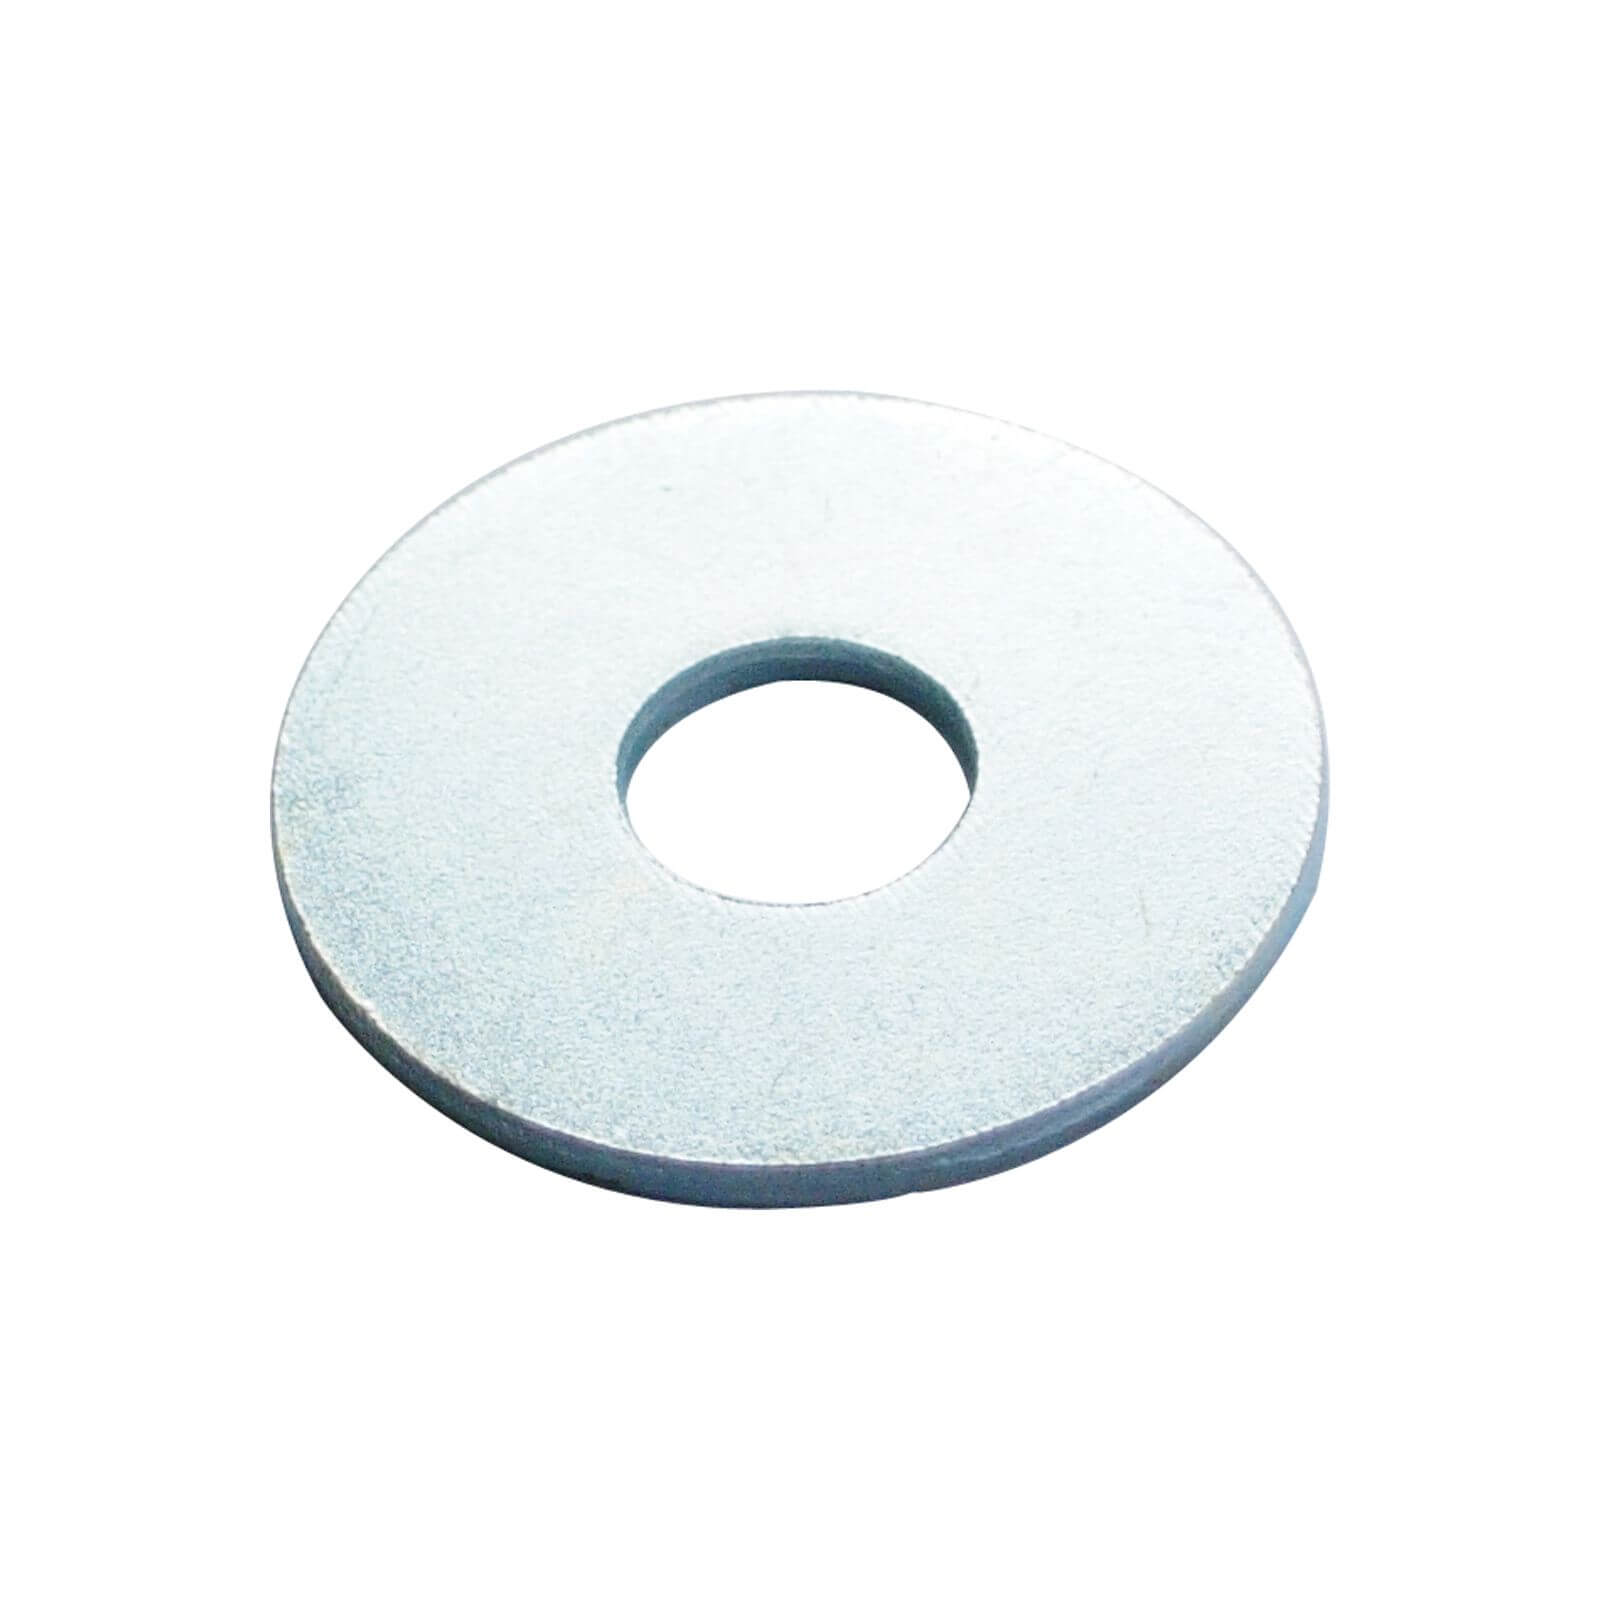 Repair Washer - Bright Zinc Plated - M8 25mm - 10 Pack